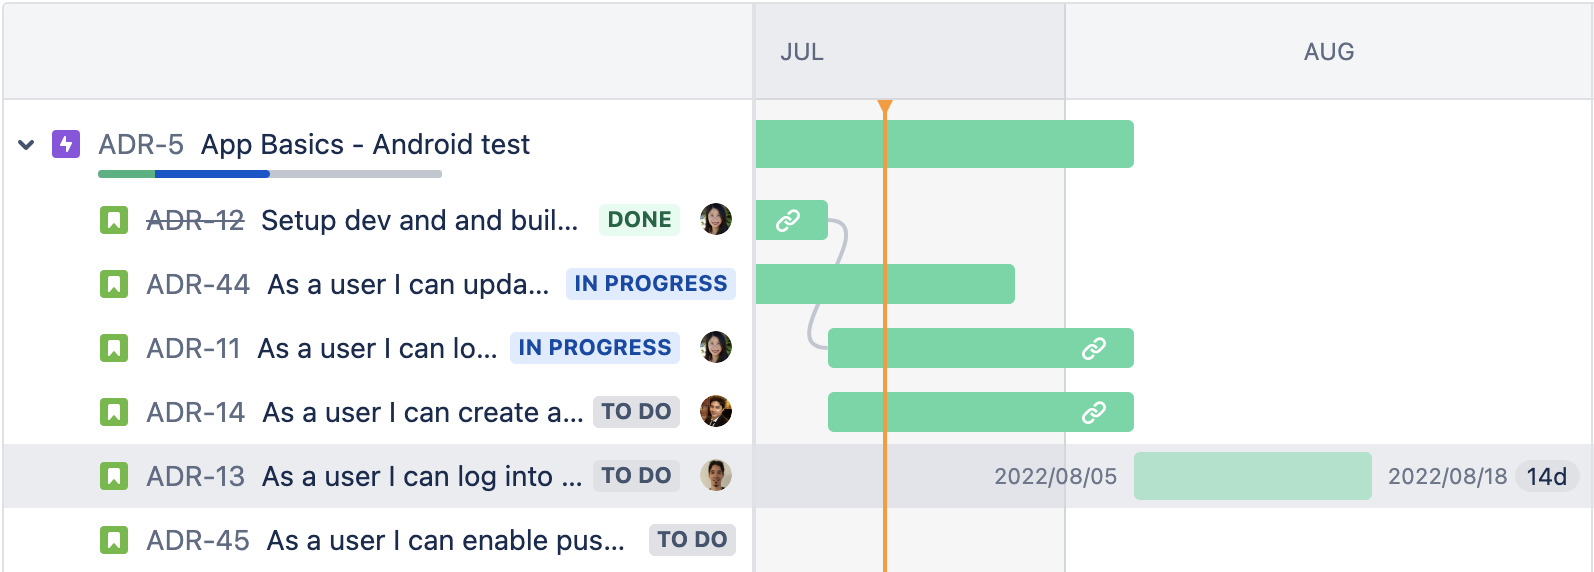 Assigning dates within Jira Roadmap